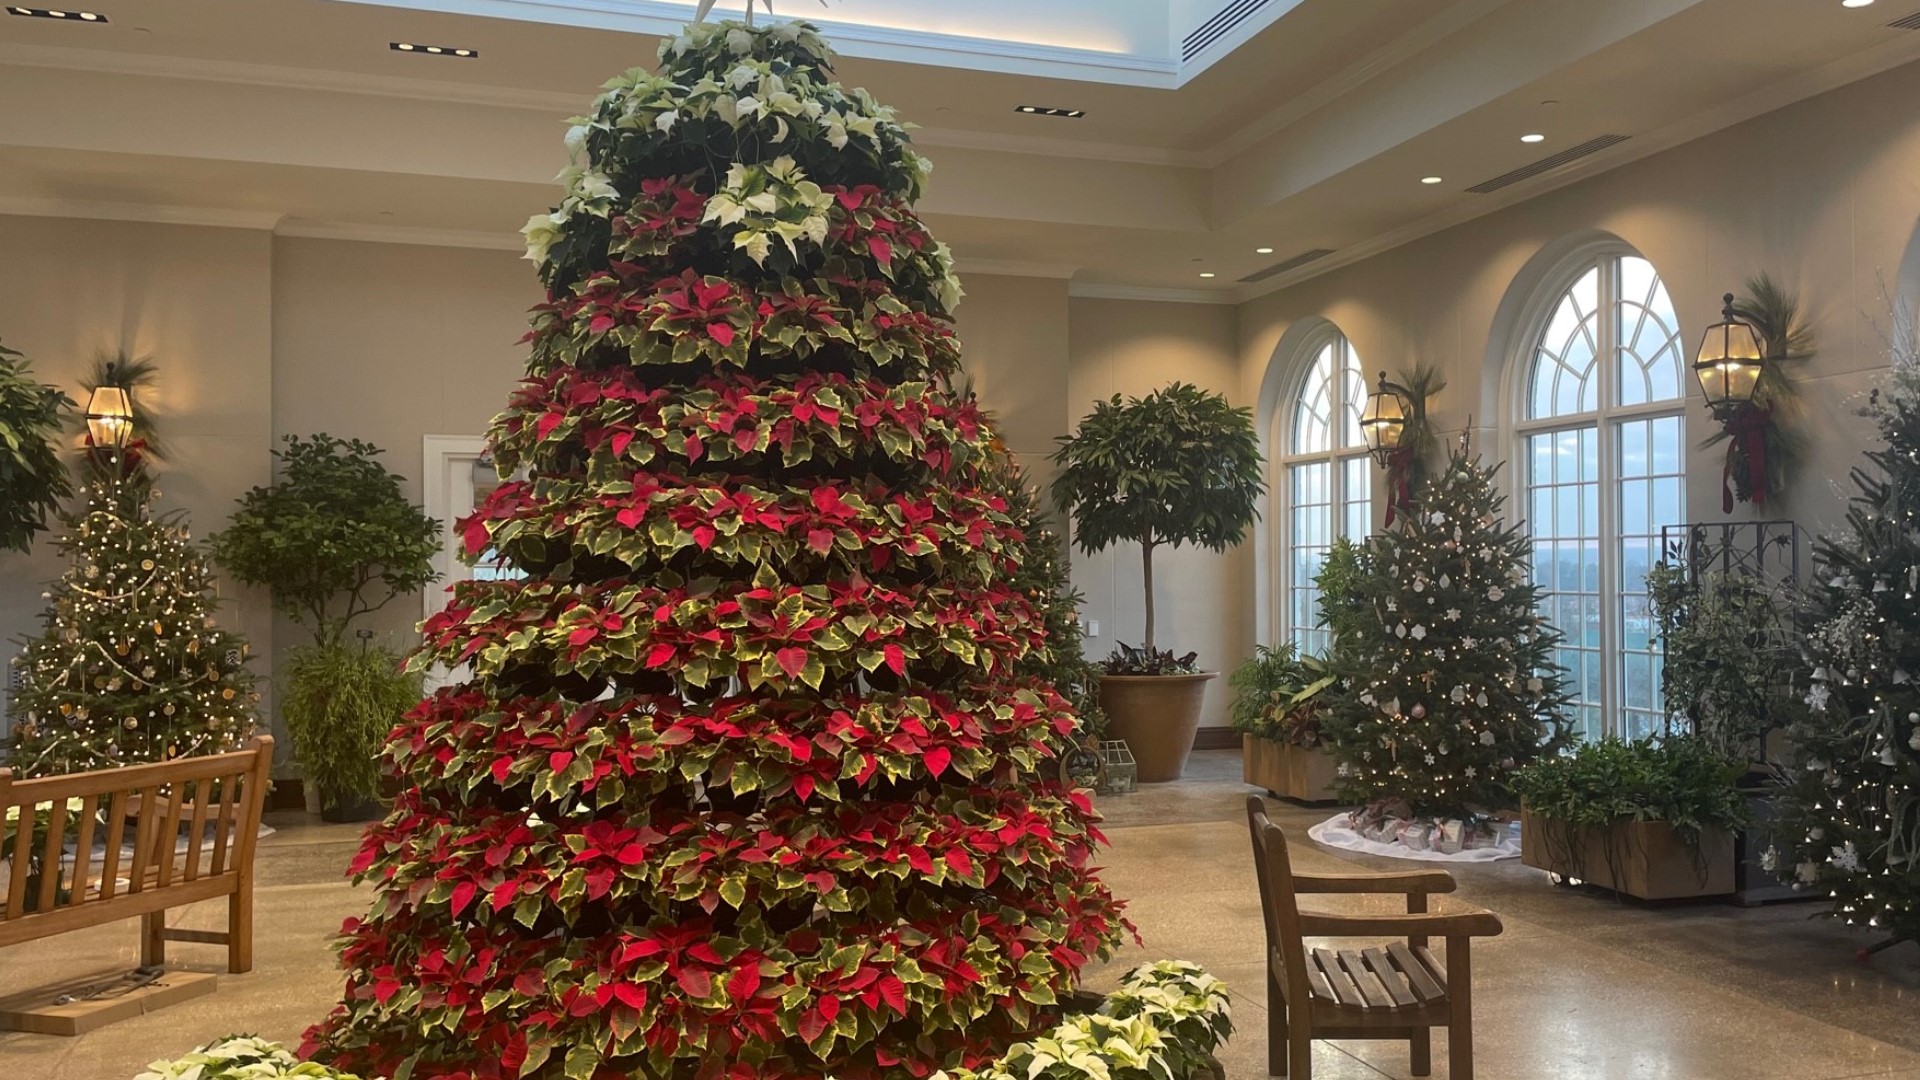 Guests can see eight Frazer firs decorated by local designers and a 14-foot tall poinsettia tree.